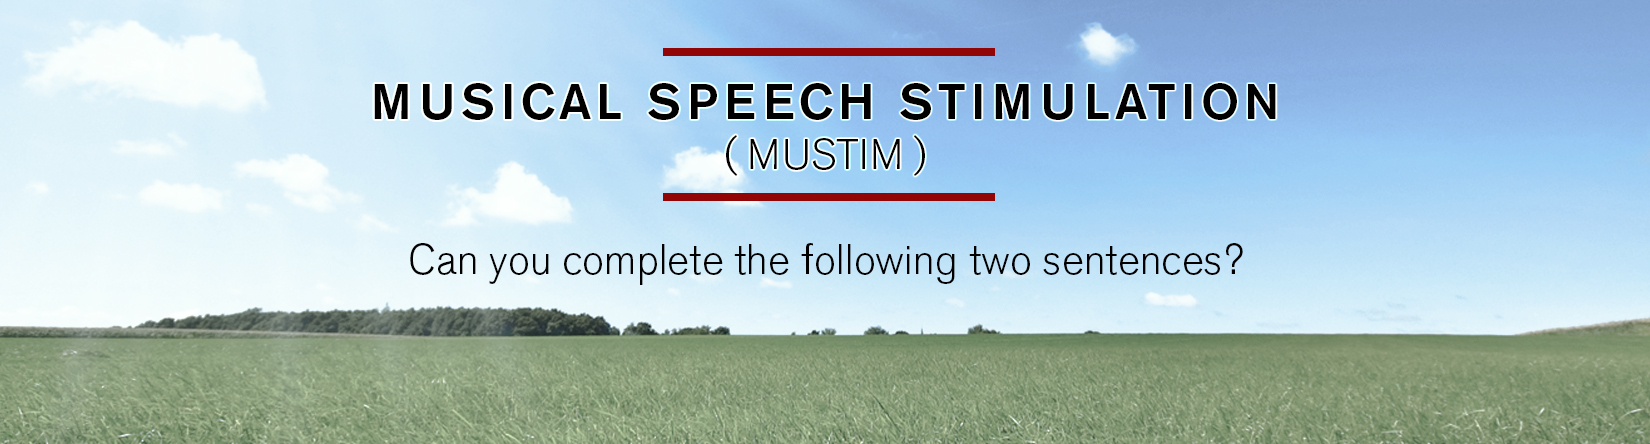 MUS I CA L S P E E C H S T IMU LATION ( M UST I M ) Can you complete the following two sentences?